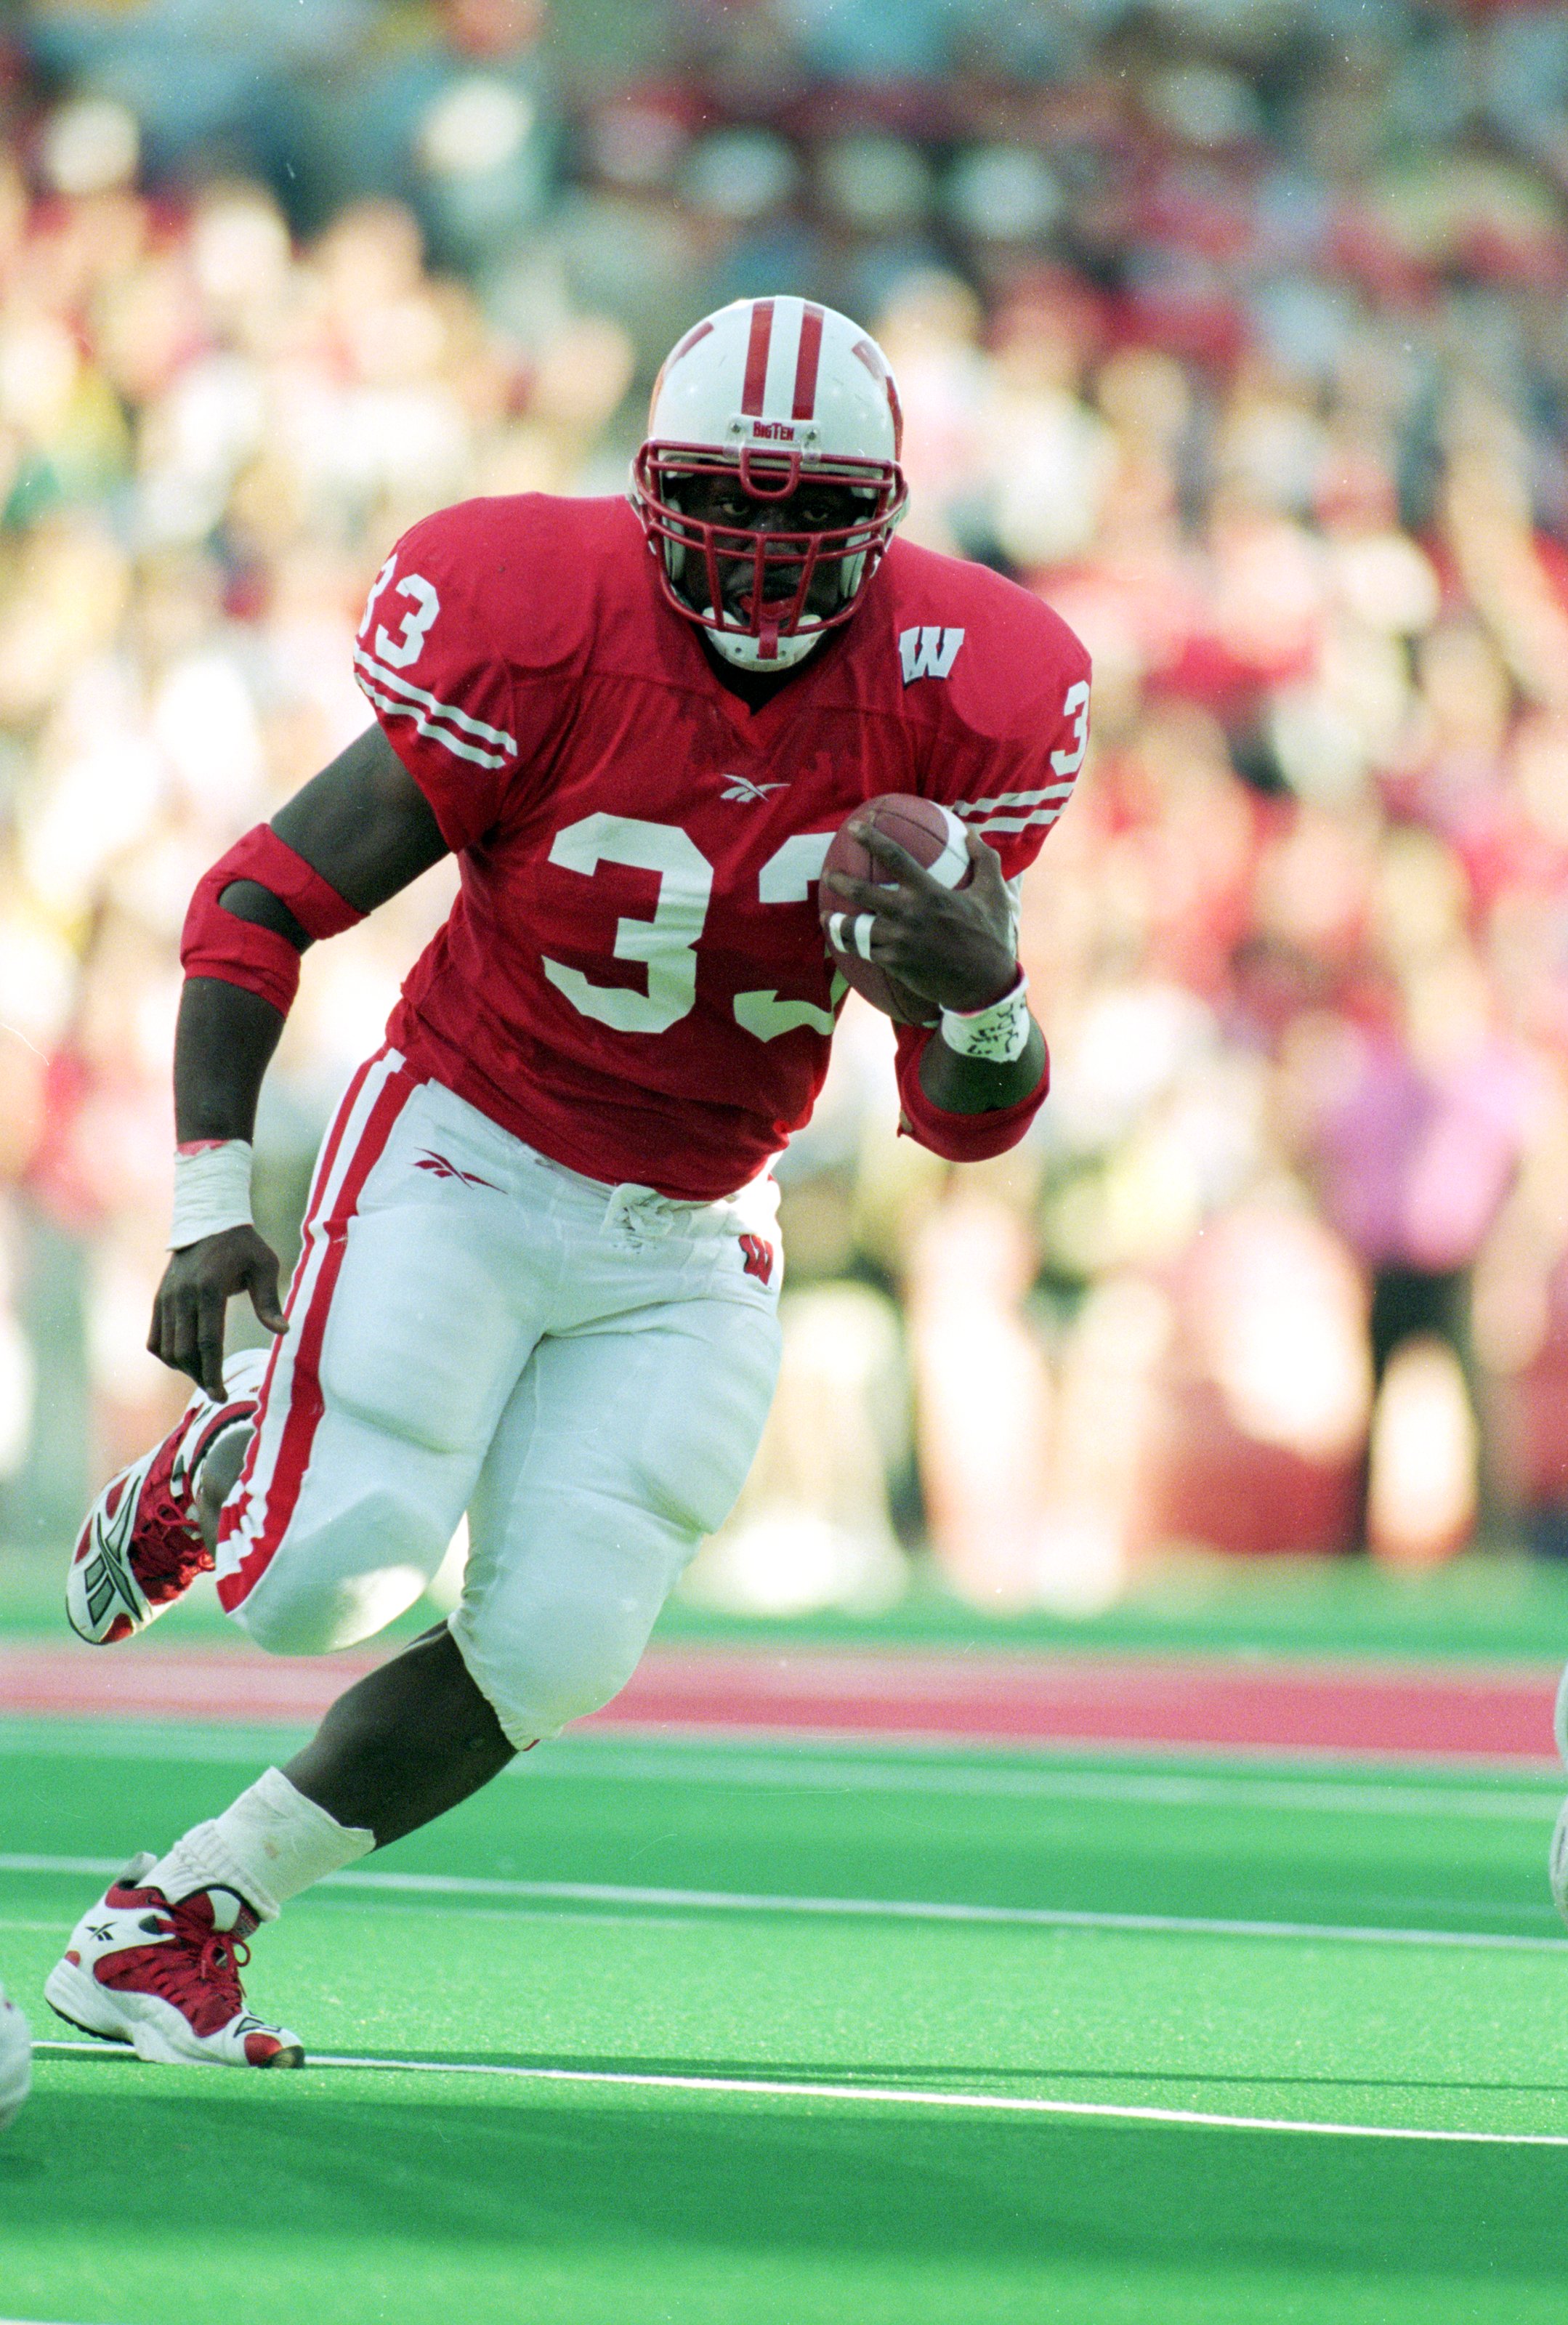 13 Nov 1999: Ron Dayne #33 of the Wisconsin Badgers carries the ball  during the game against the  Iowa Hawkeyes at the Camp Randall Stadium in Madison, Wisconsin. The Badgers defeated the Hawkeyes 41-3. Mandatory Credit: Matthew Stockman  /Allsport